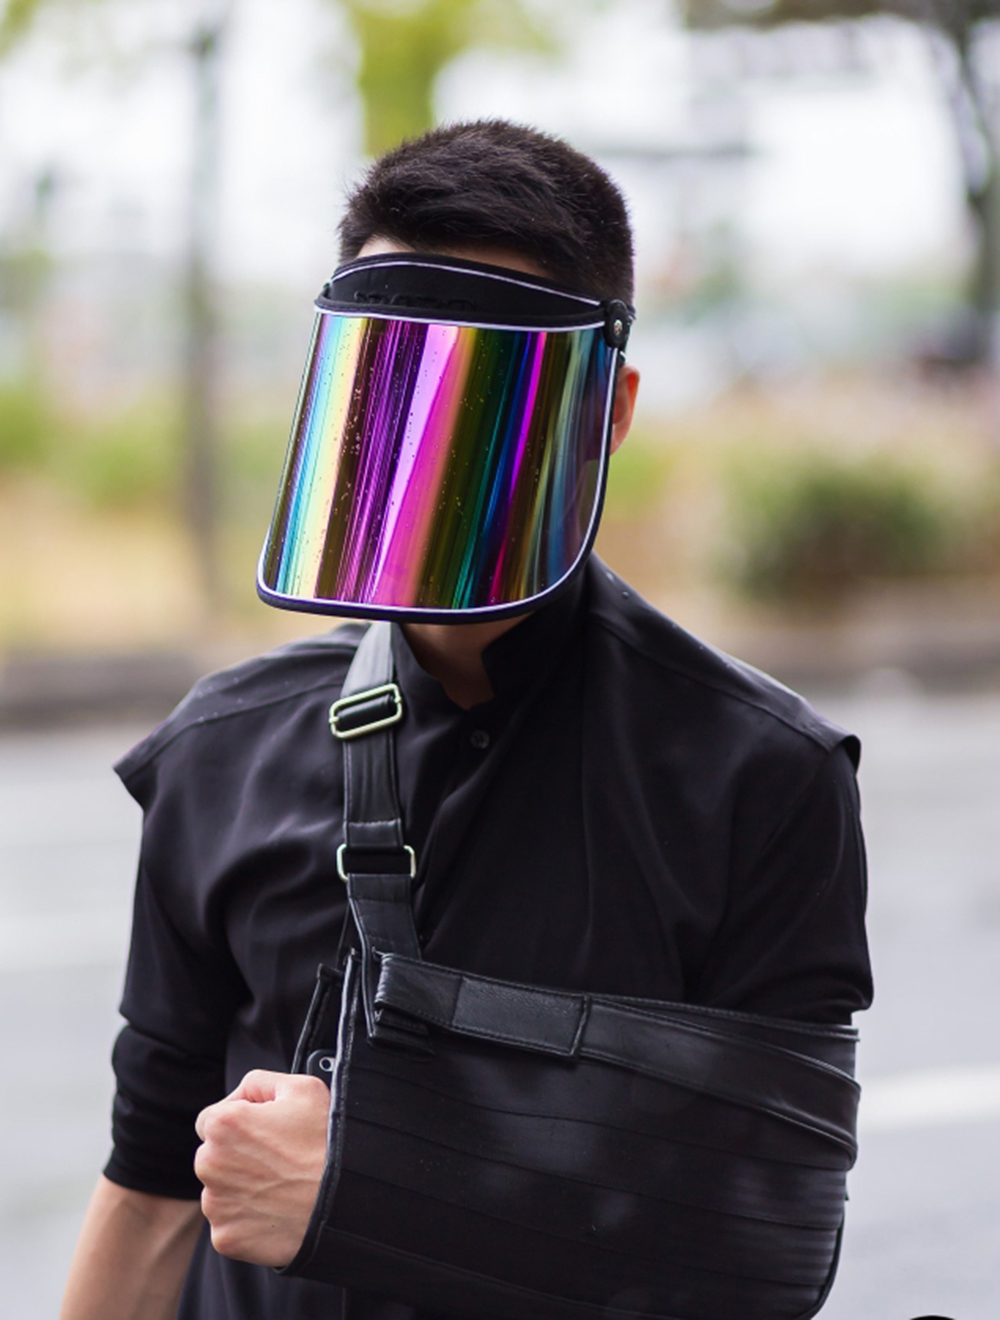 A perfect disguise: Who wants to bump into someone they know while at the supermarket? Wear a visor. Photo / Style du Monde